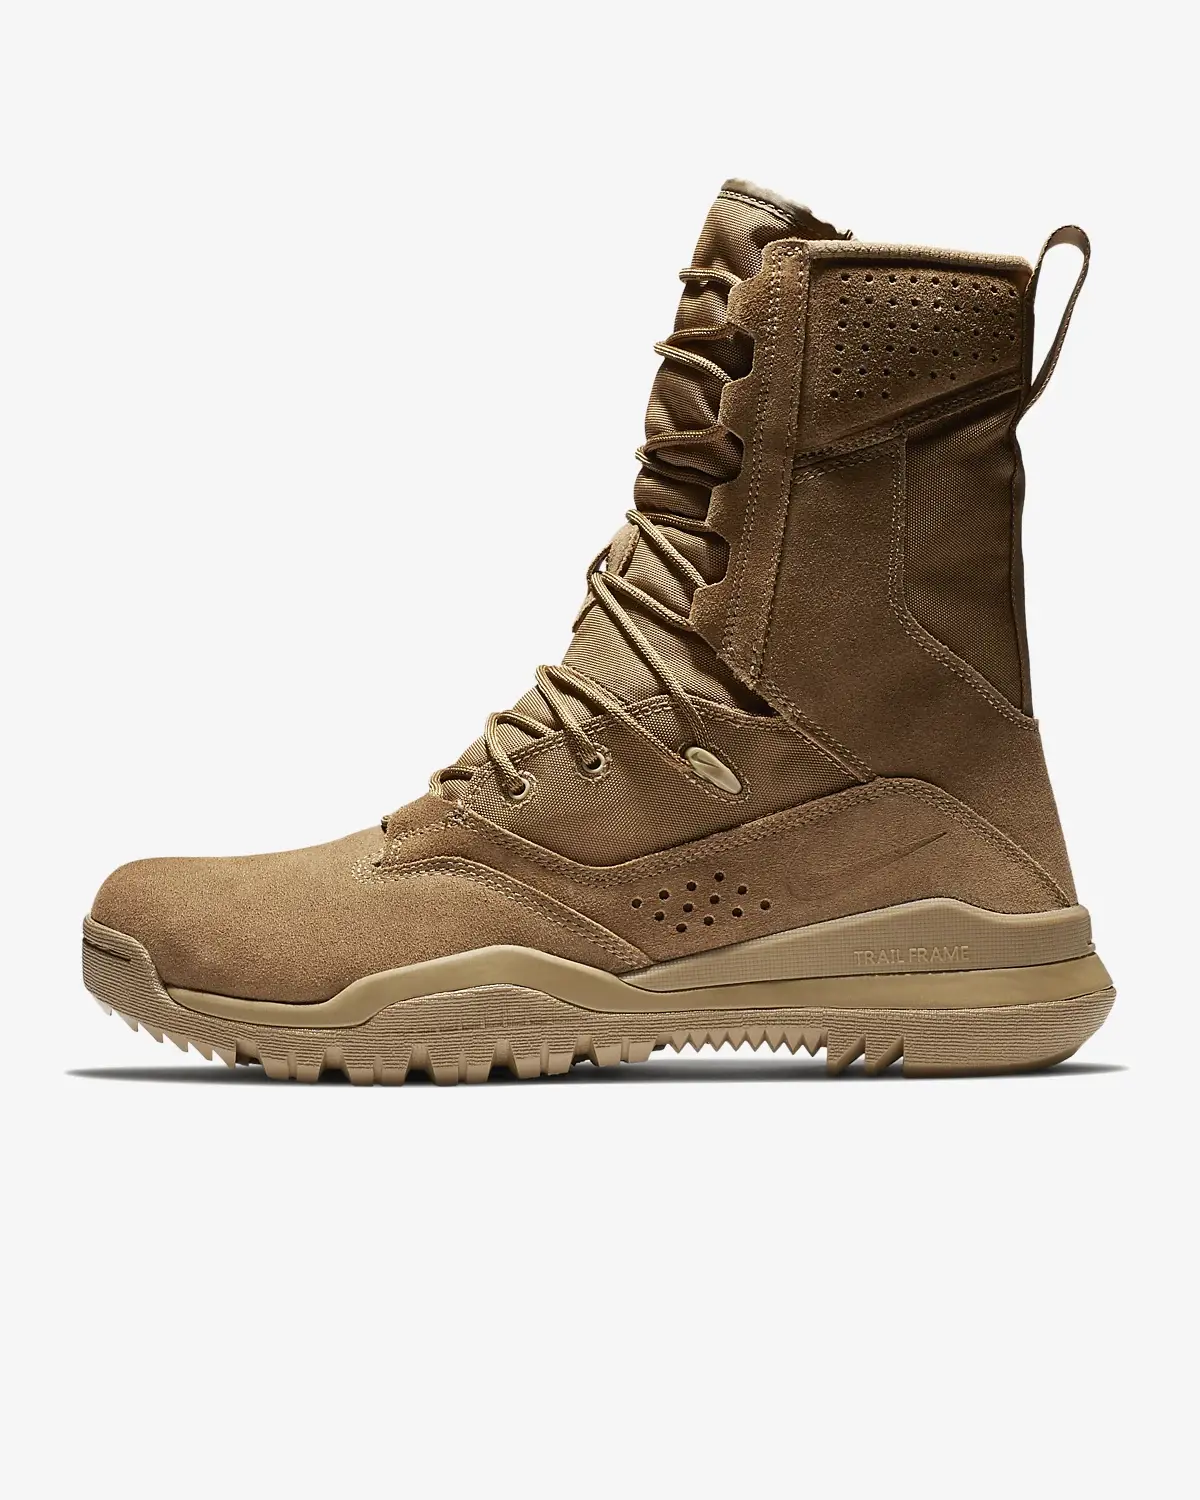 Nike SFB Field 2 20cm (approx.) Leather. 1